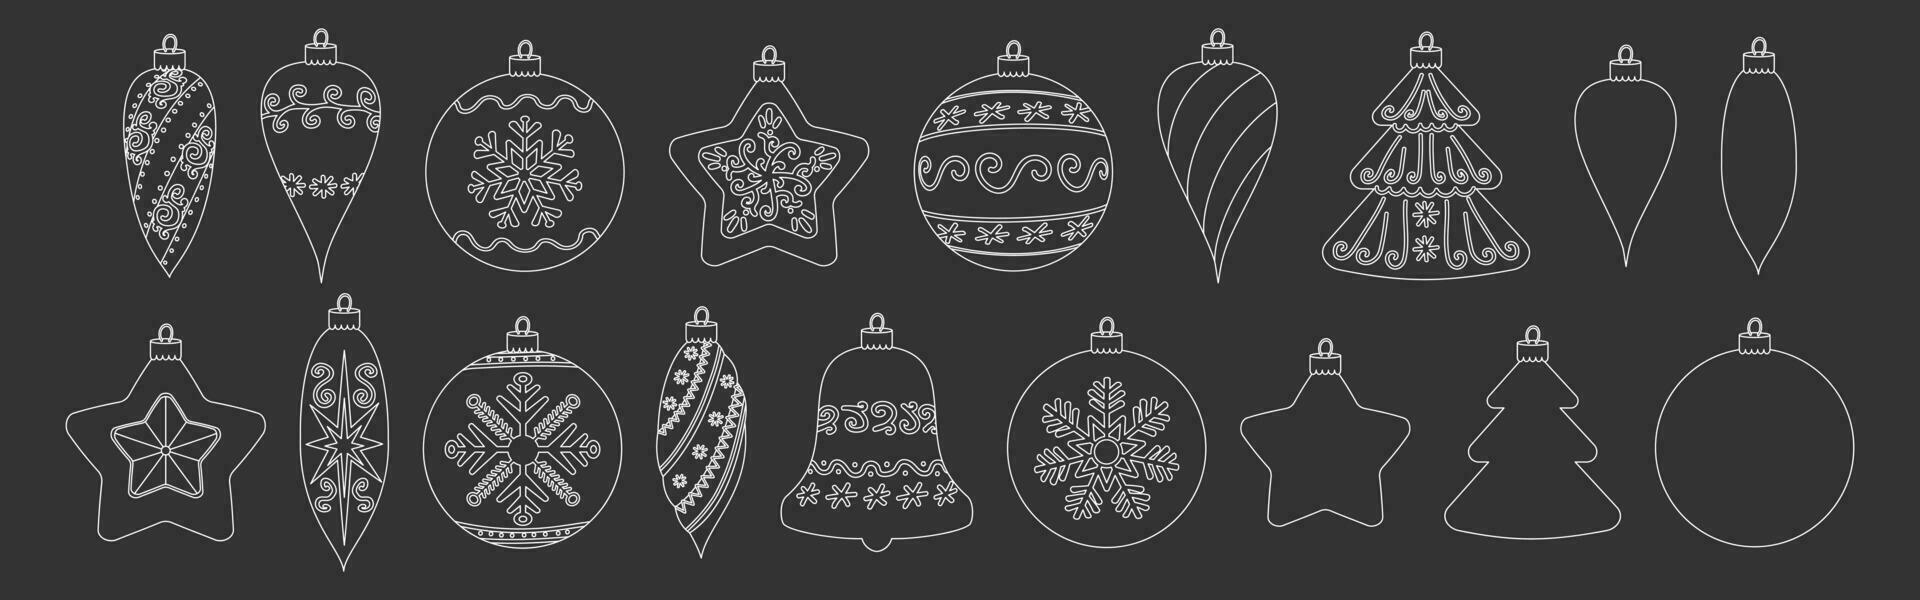 Set of contour icons of Christmas tree ornaments. Black and white symbols of Christmas and New Year. Christmas ball, star, bell, spruce, icicle. Vector illustration.